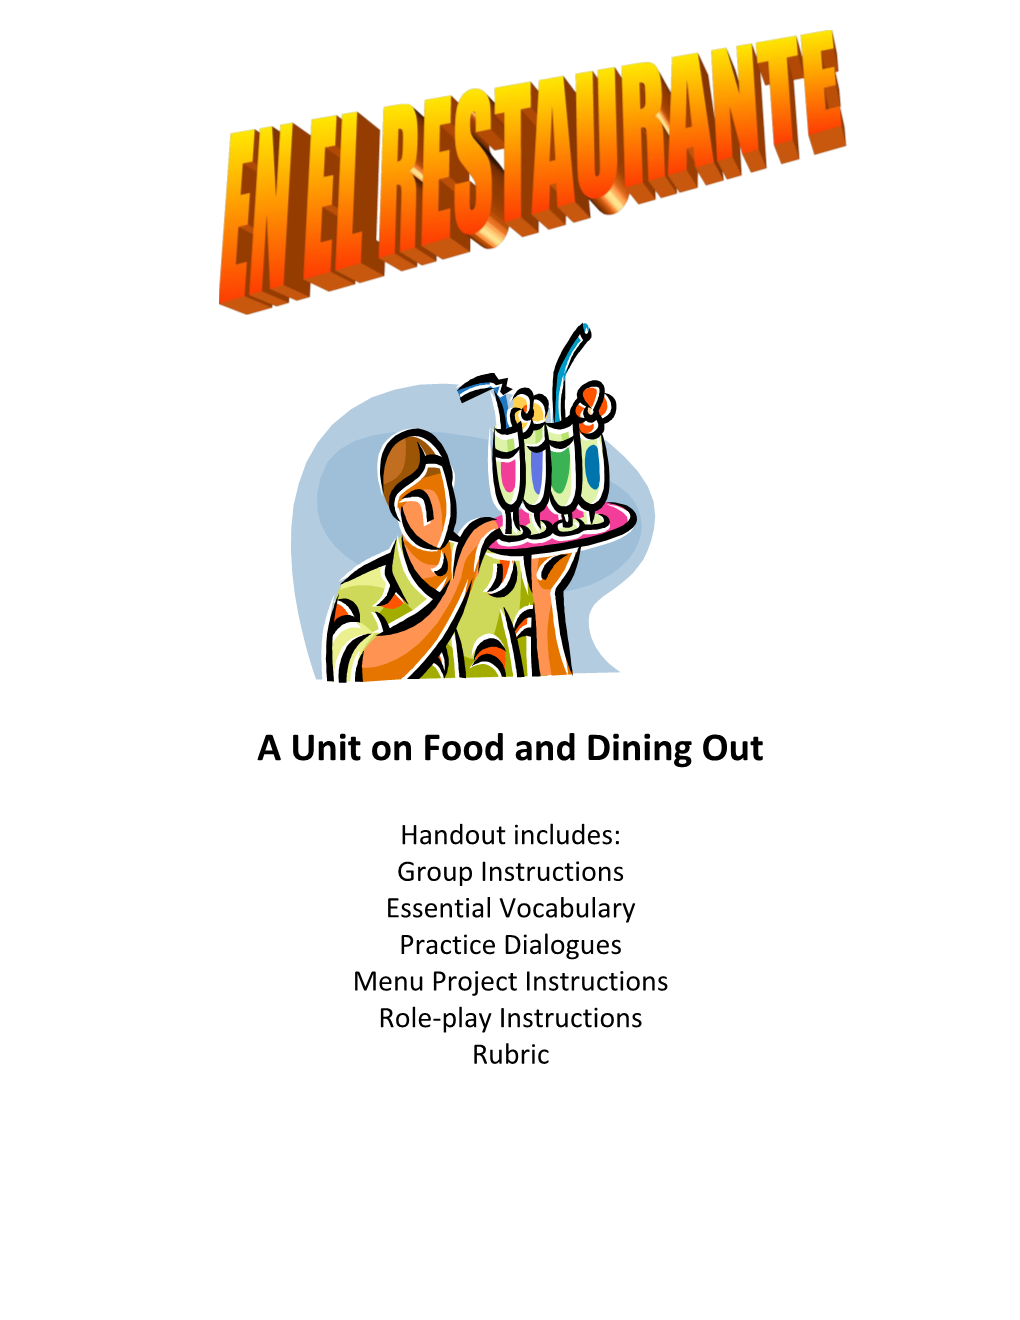 A Unit on Food and Dining Out